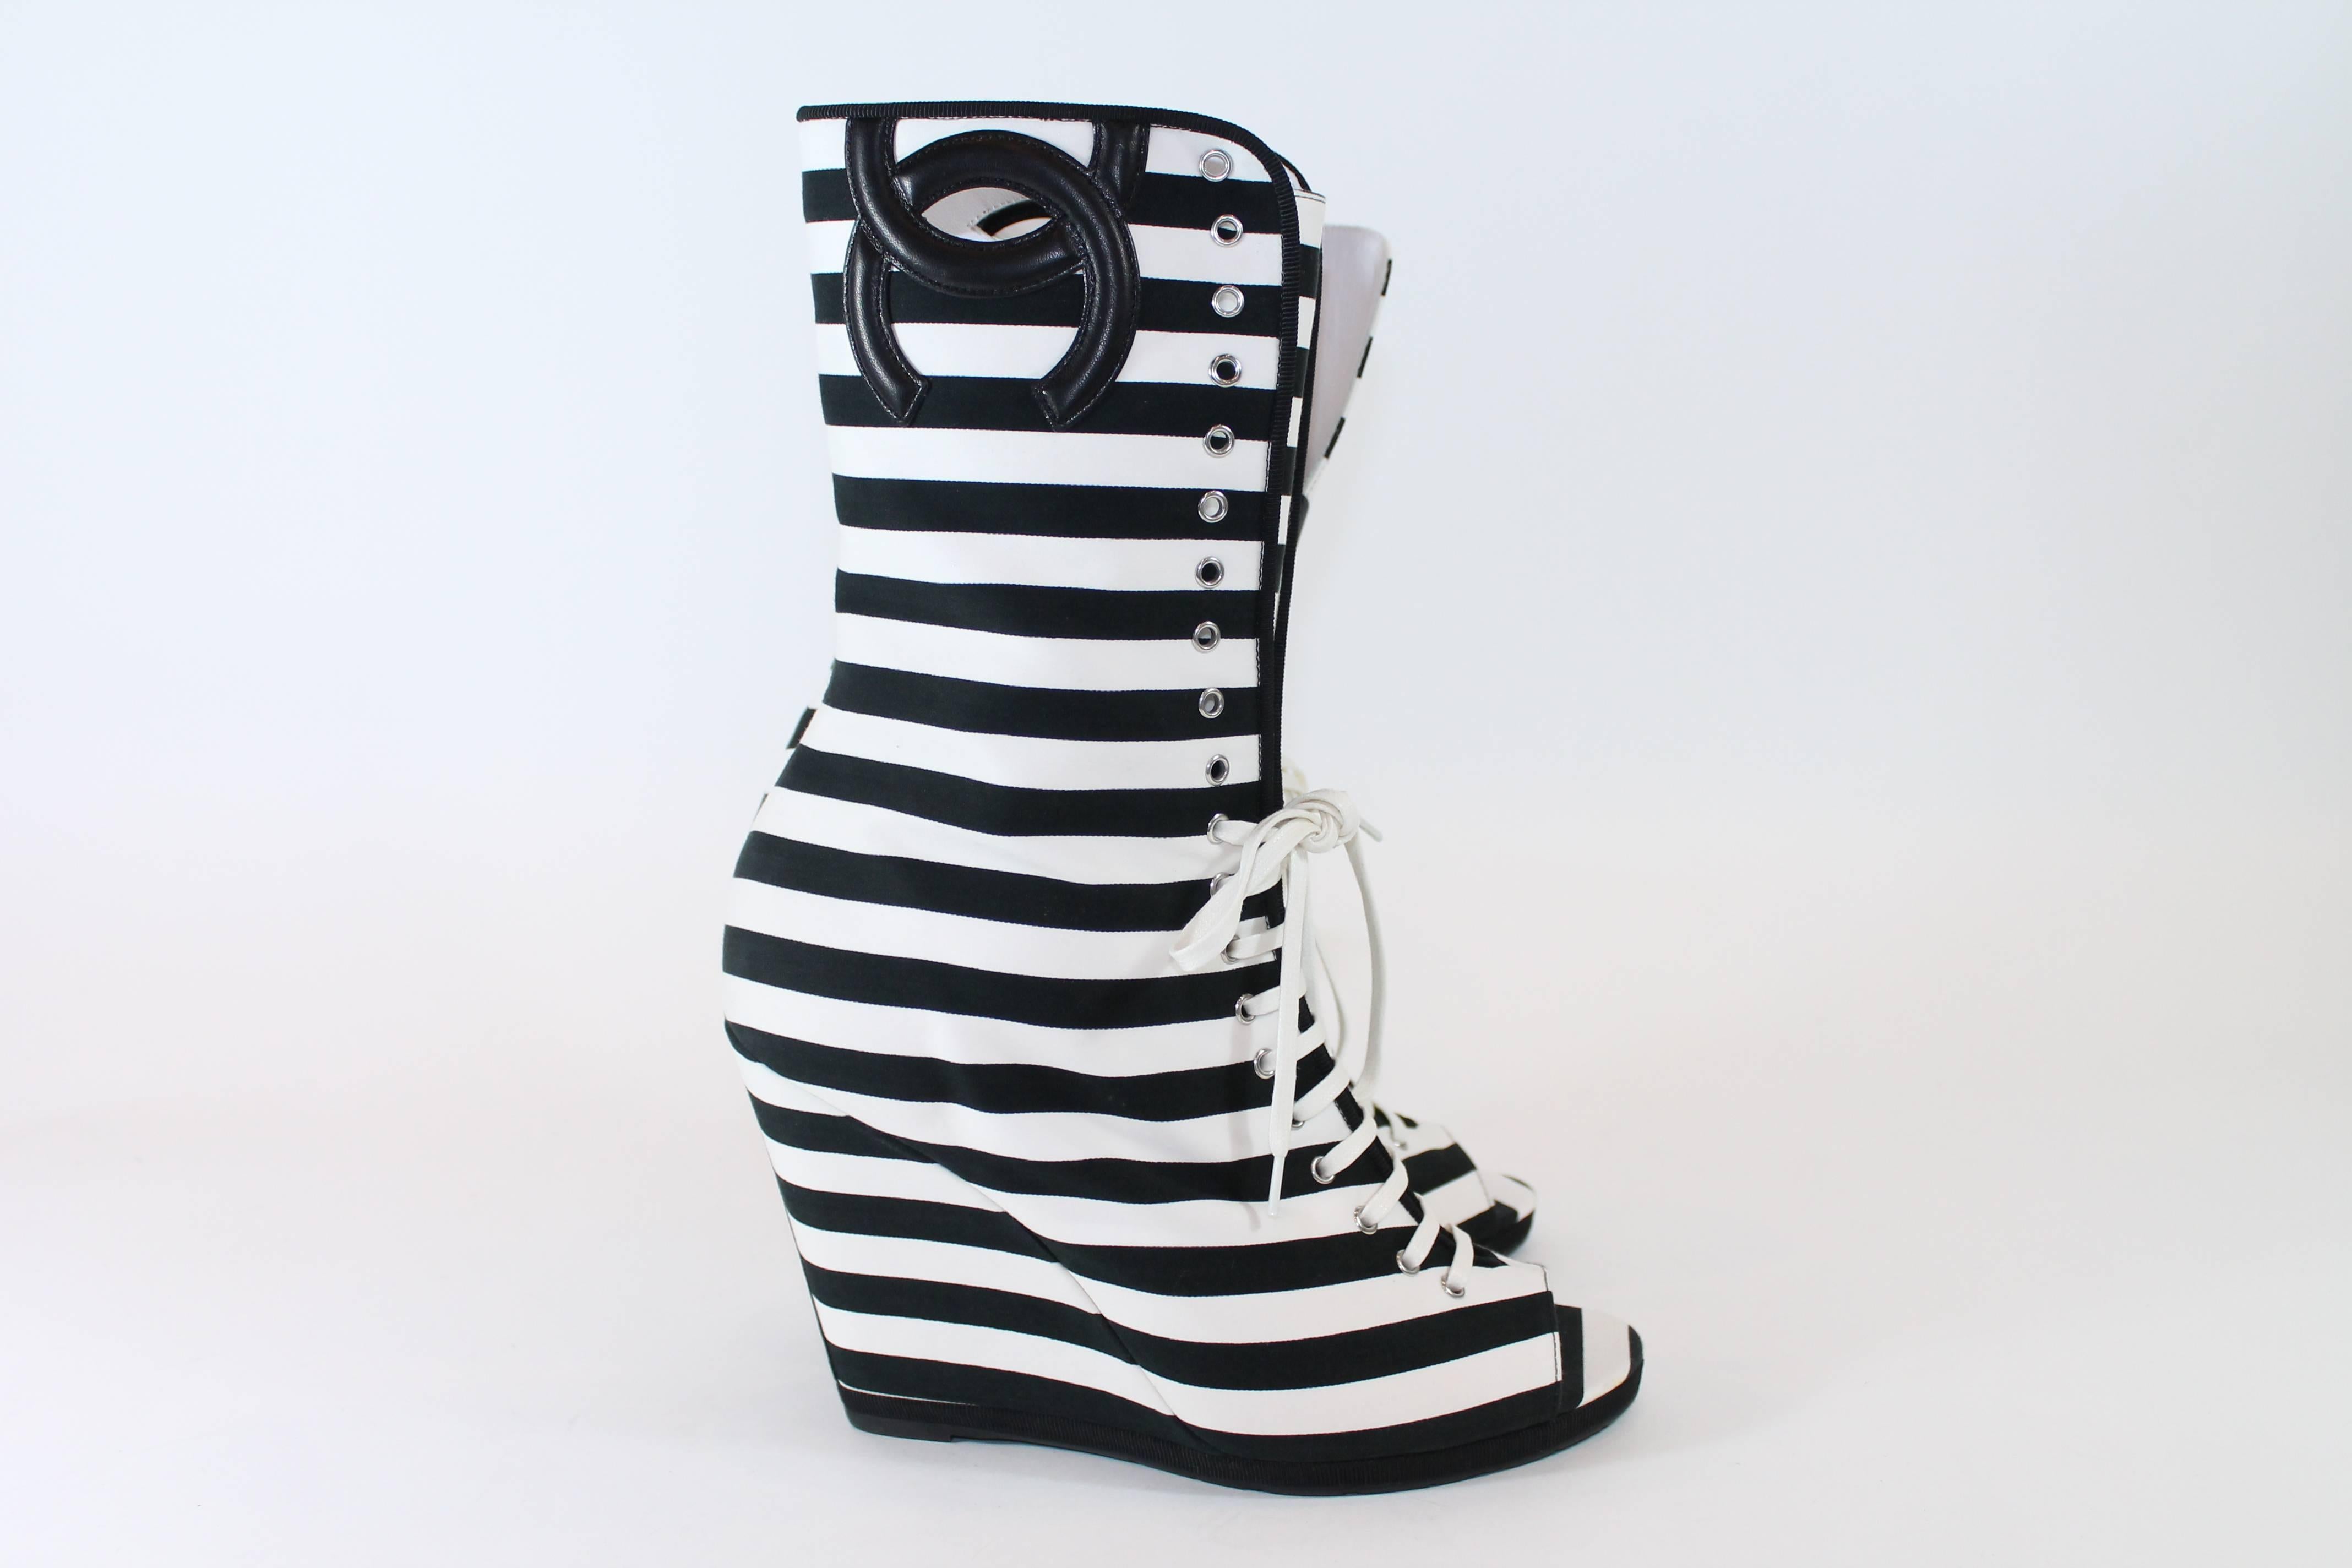 Size 41. These boots have a 4 inch canvas wrapped wedge. They are calf length with a black stitched Chanel logo at top of boot. Black and white stripes on entire shoe. Open toed with white laces. black leather soles.